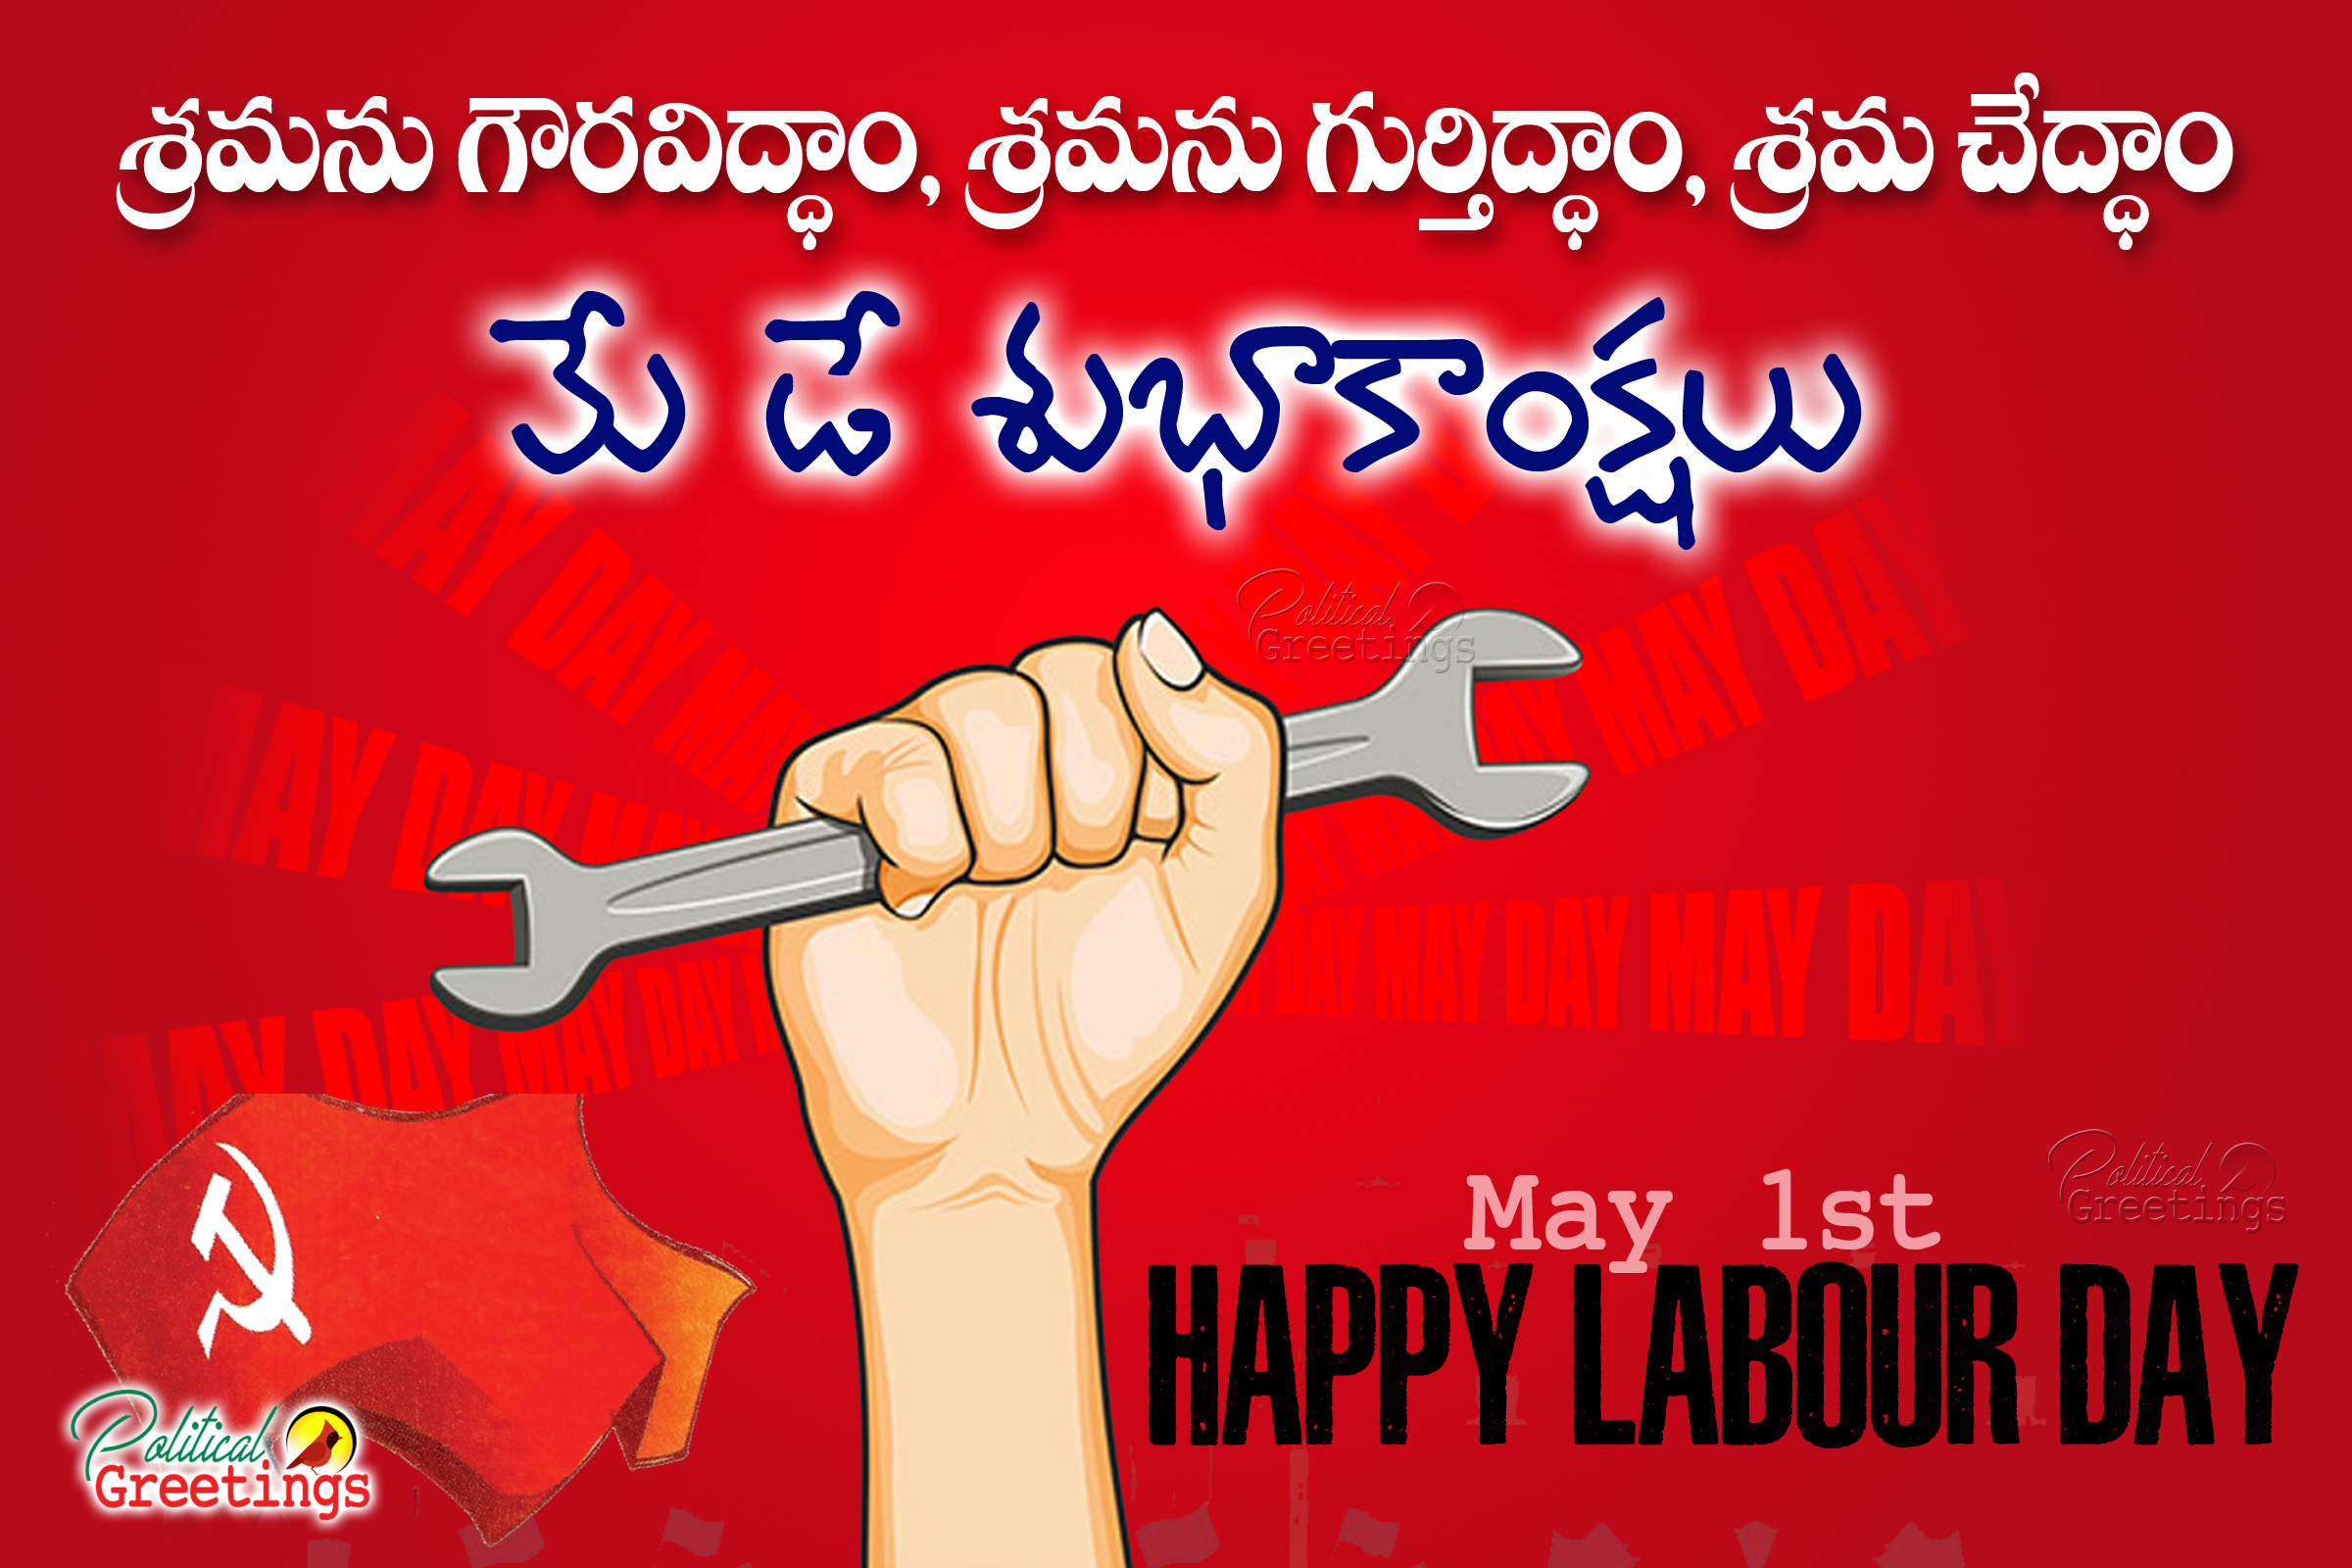 Top Famous Telugu May Day Wishes In Telugu Language, - Labour Quotes In Telugu - HD Wallpaper 